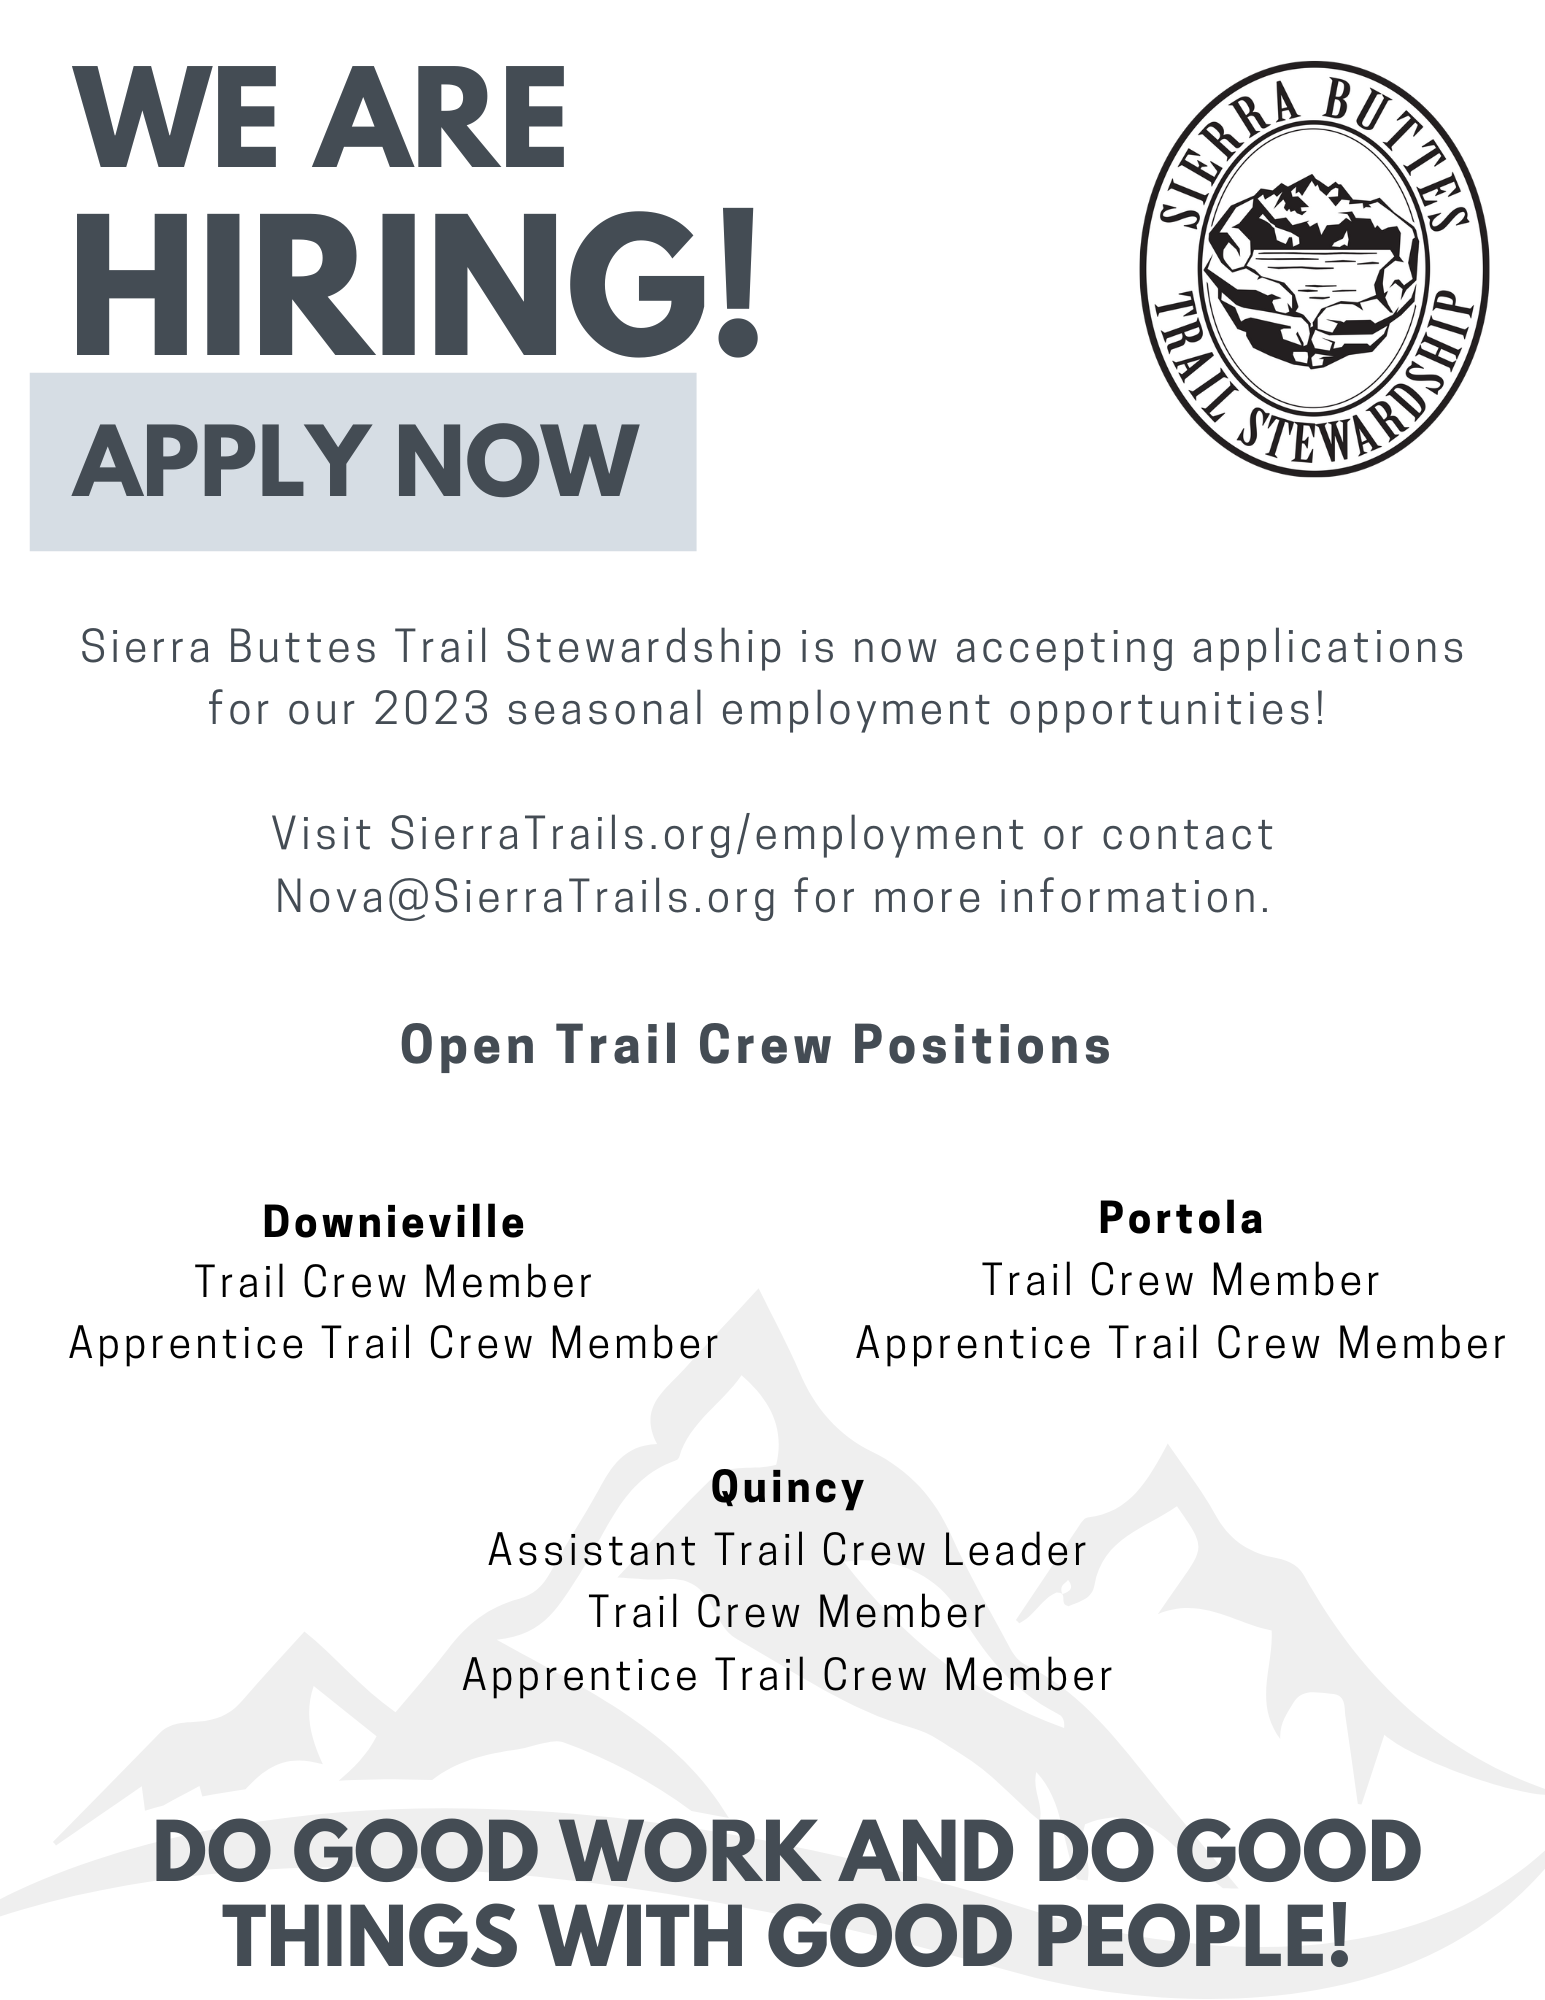 We are hiring Trail Crew